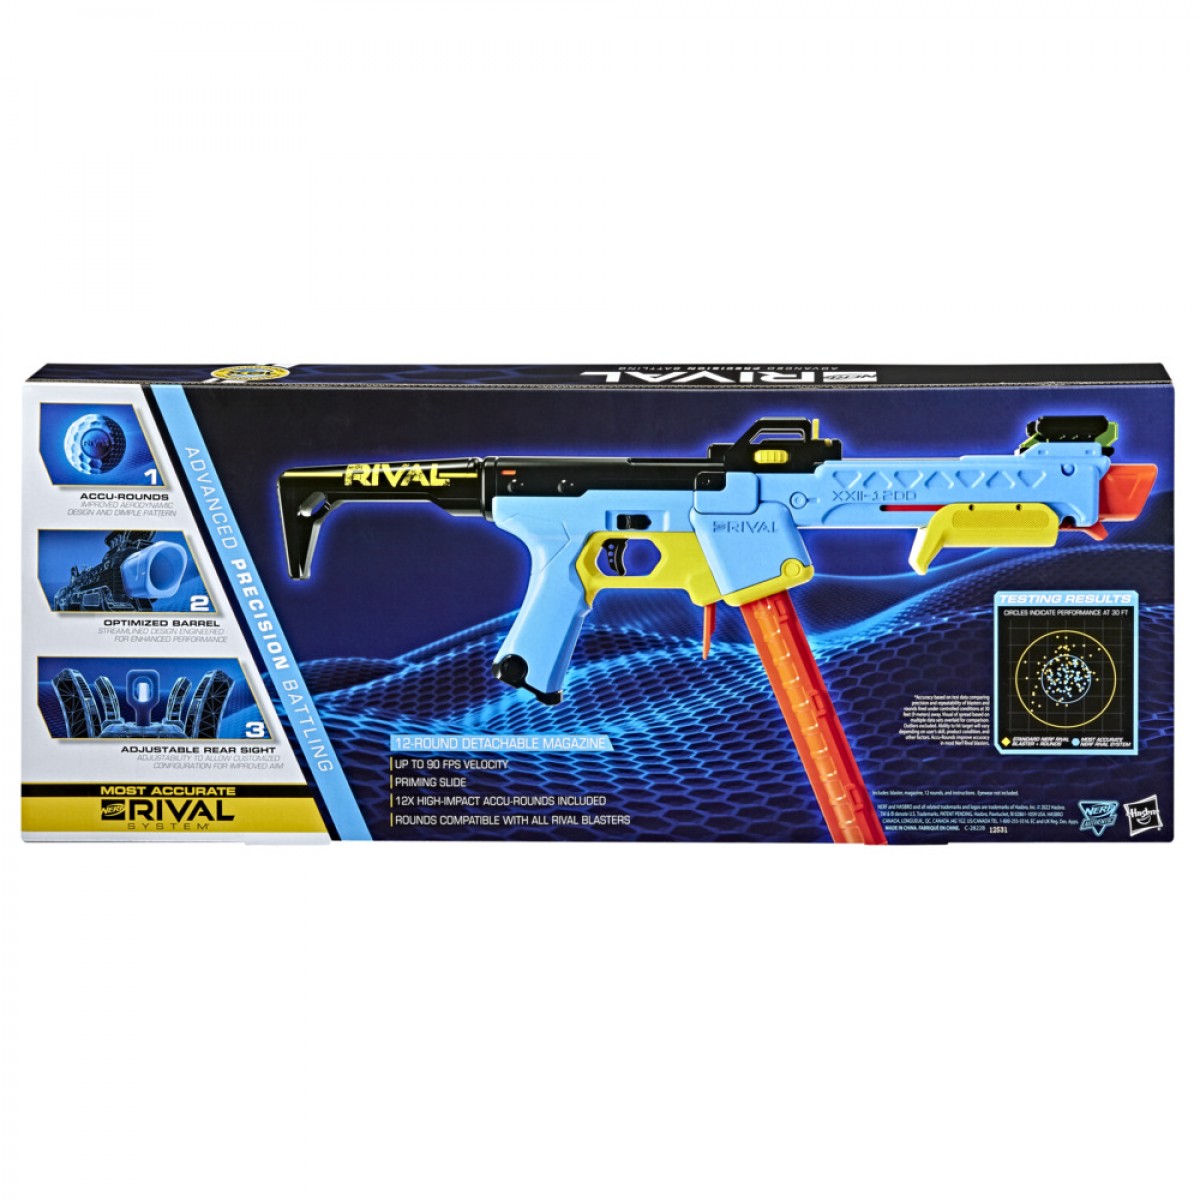 Nerf Rival Pathfinder Xxii-1200 Blaster, Most Accurate Nerf Rival System, Adjustable Sight, 12-Round Magazine, 12 Nerf Rival Accu-Rounds, 14Yrs+, Multicolour